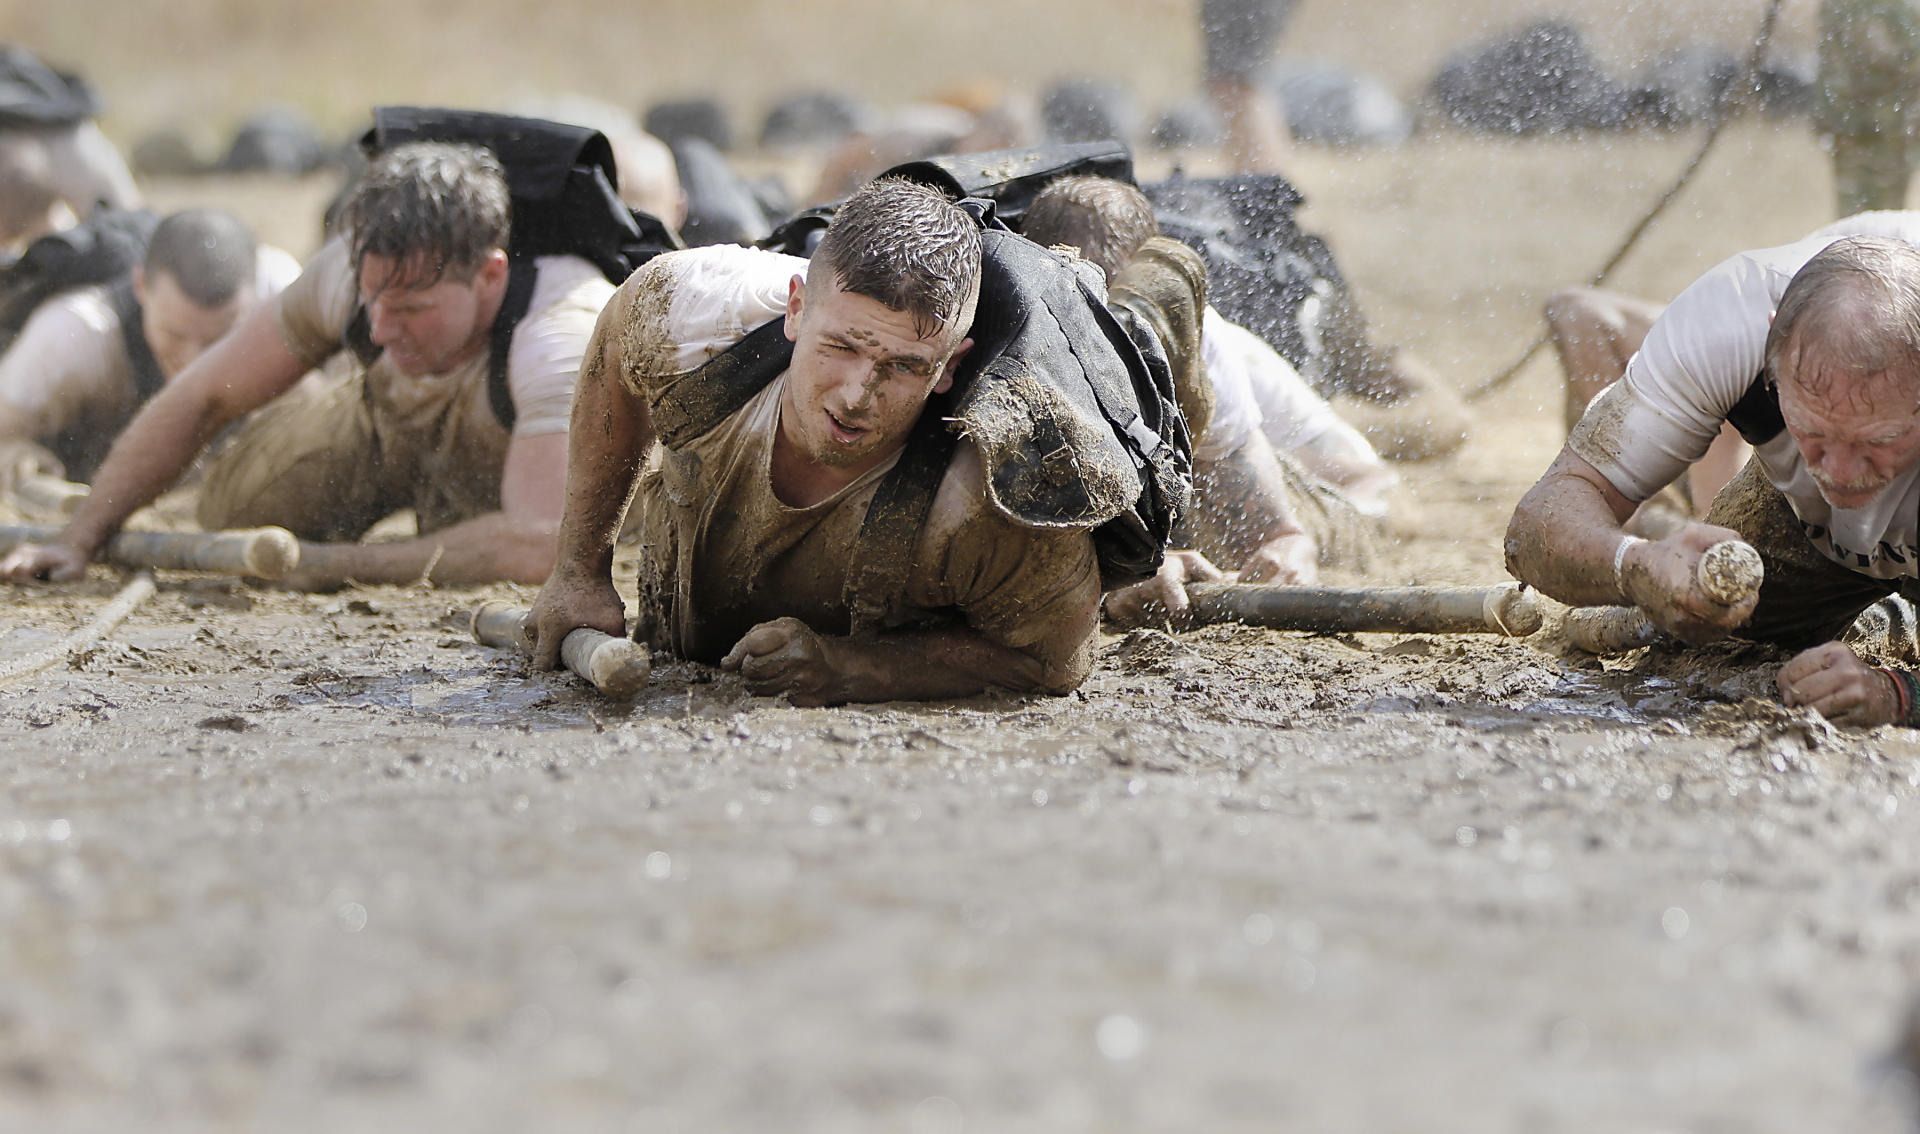 SEALFIT, a San Diego business transforms participants using Navy SEAL training methods